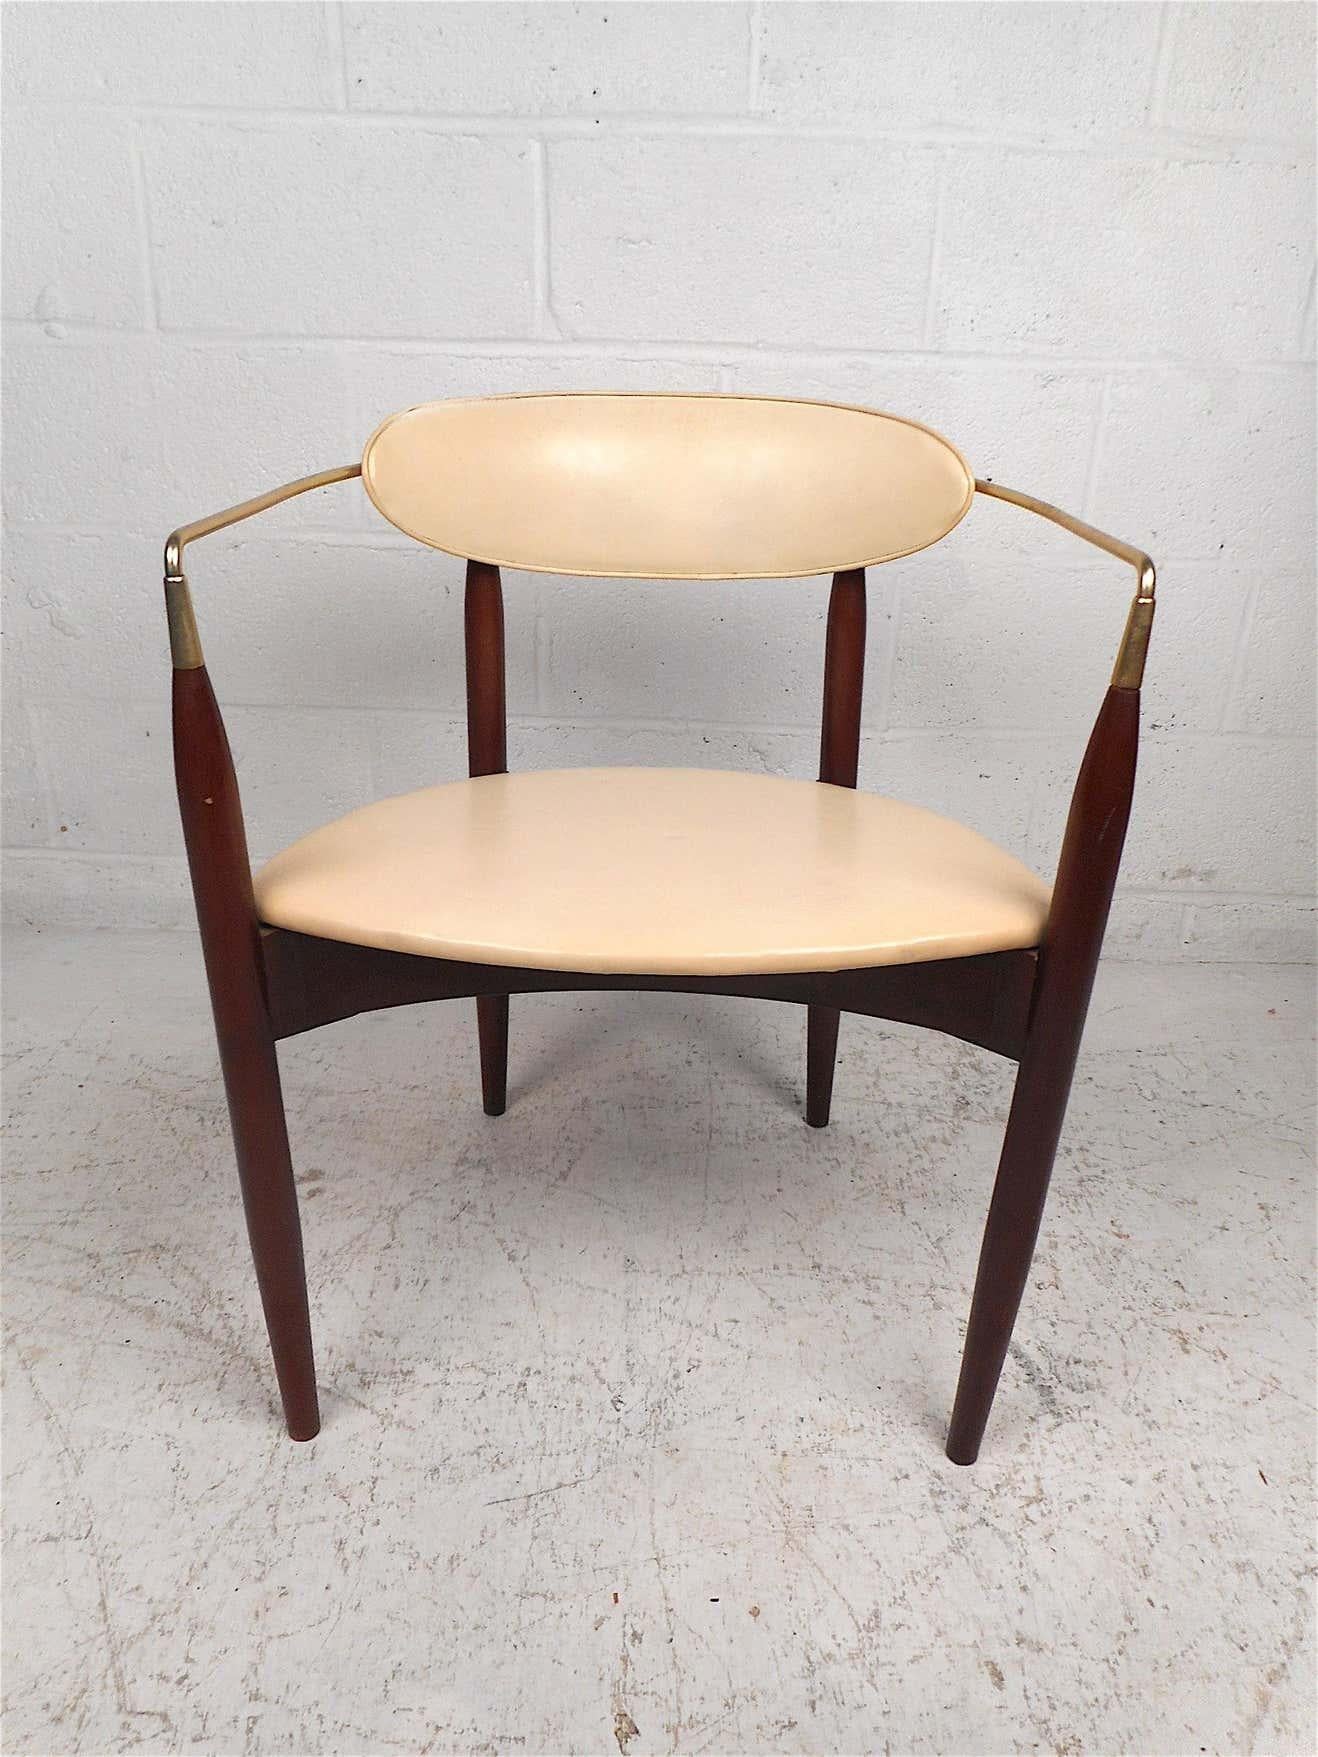 Stylish Mid-Century Modern chair manufactured by Kedawood Furniture. Unusual design with tapered legs, contoured brass armrests, seat and backrest covered in a vintage white vinyl. This chair is sure to make a great addition to any modern interior.